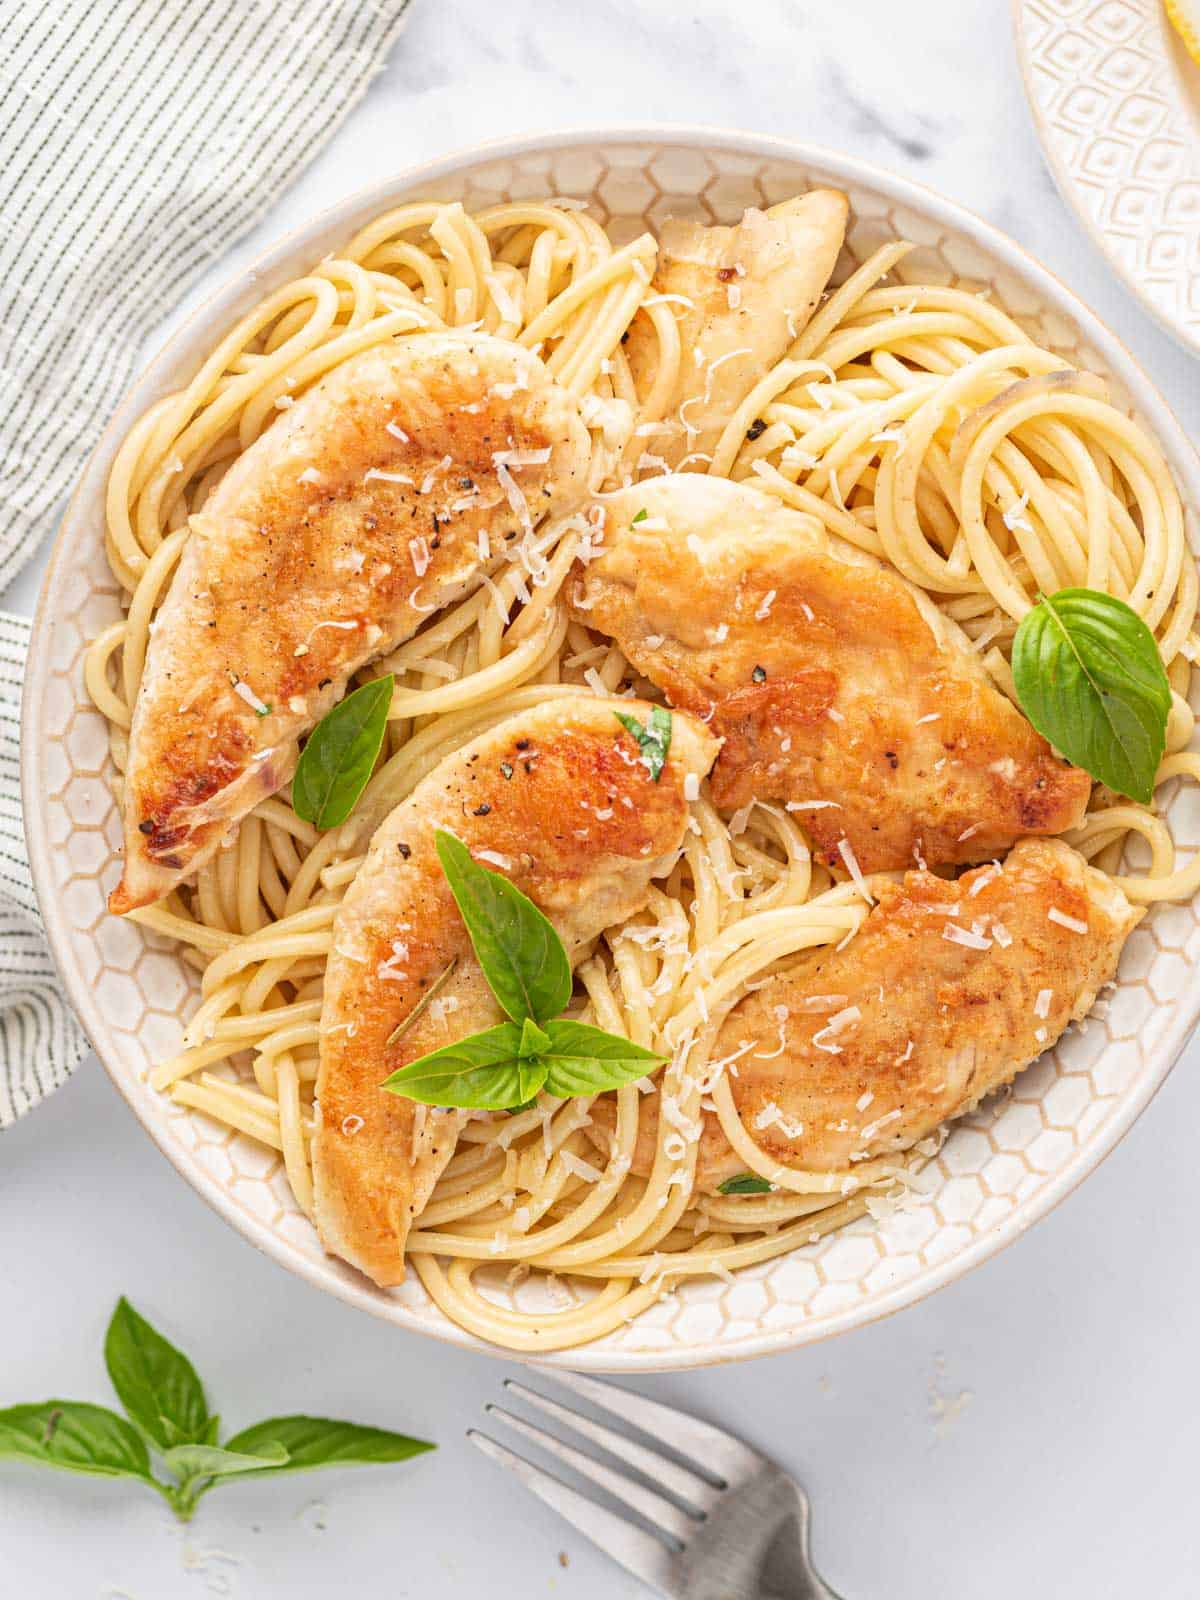 Chicken scampi in a bowl with pasta and topped with fresh basil.